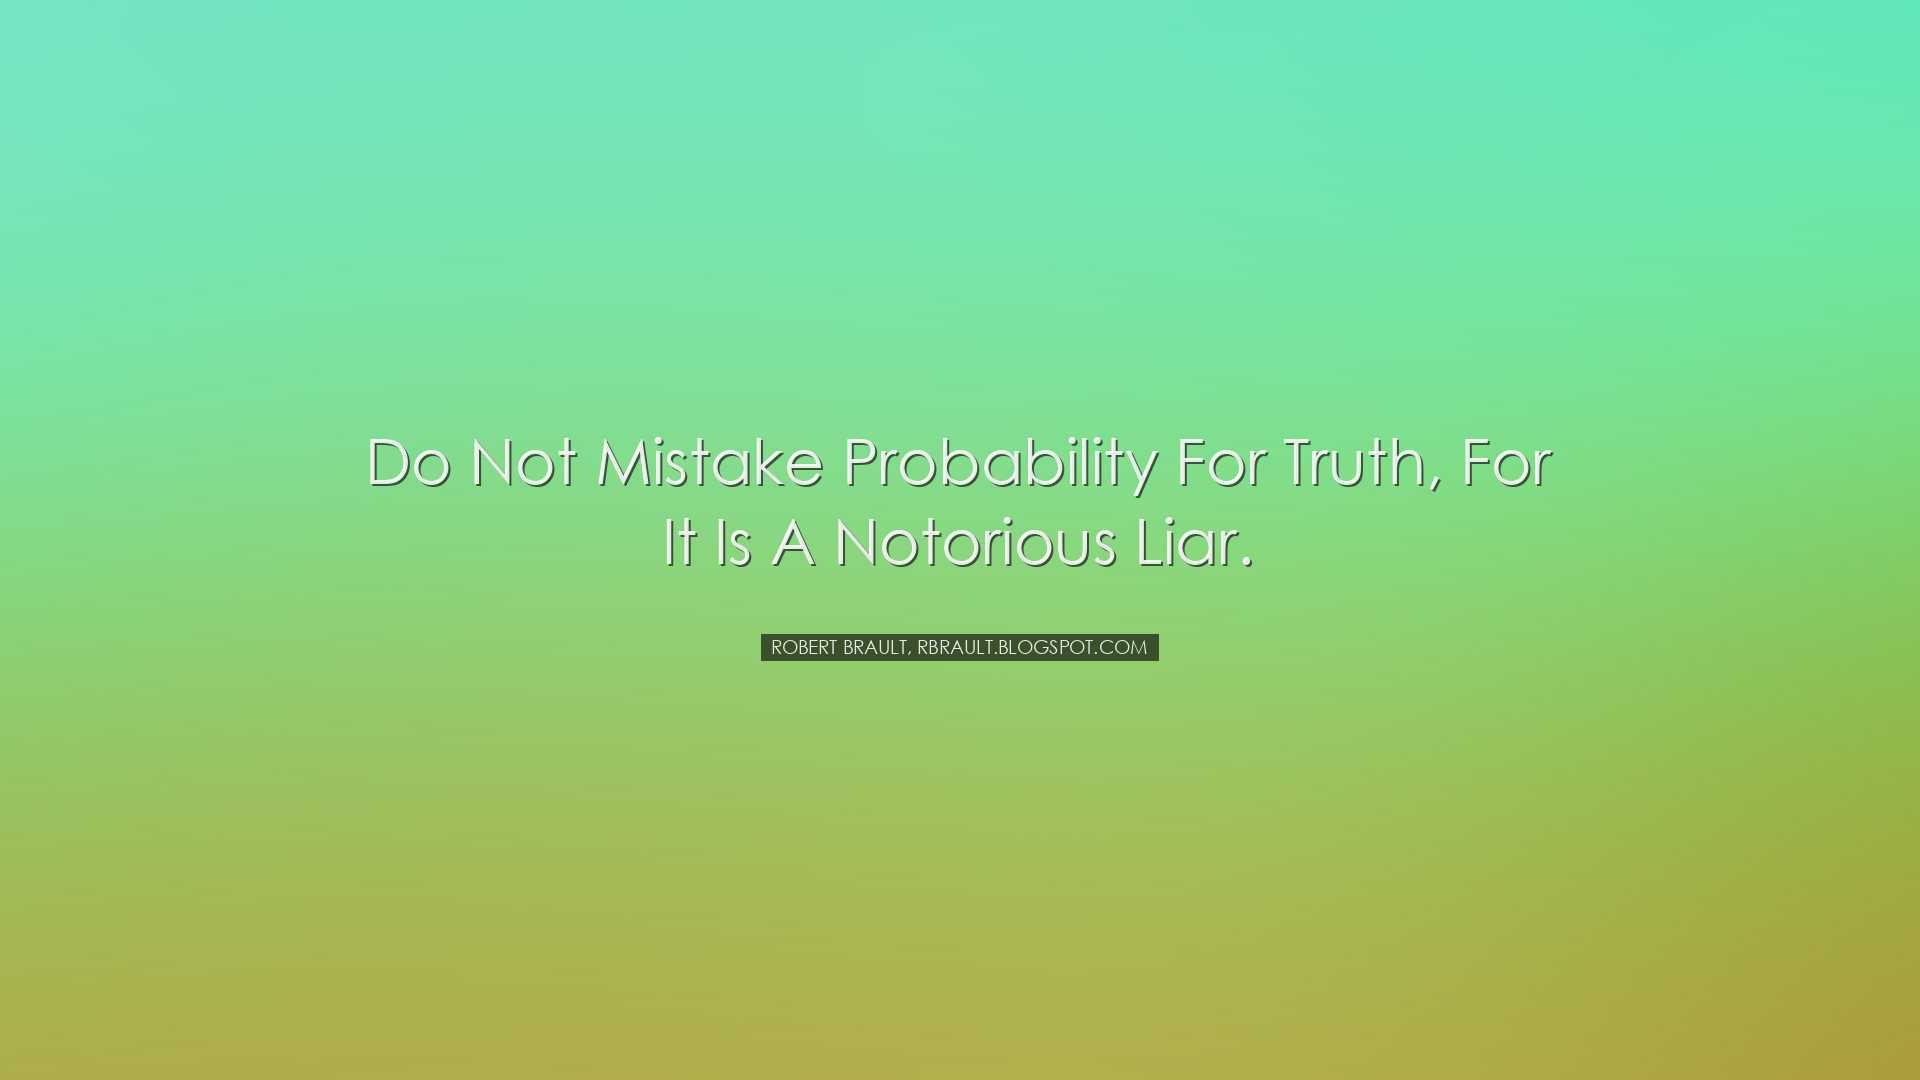 Do not mistake probability for truth, for it is a notorious liar.